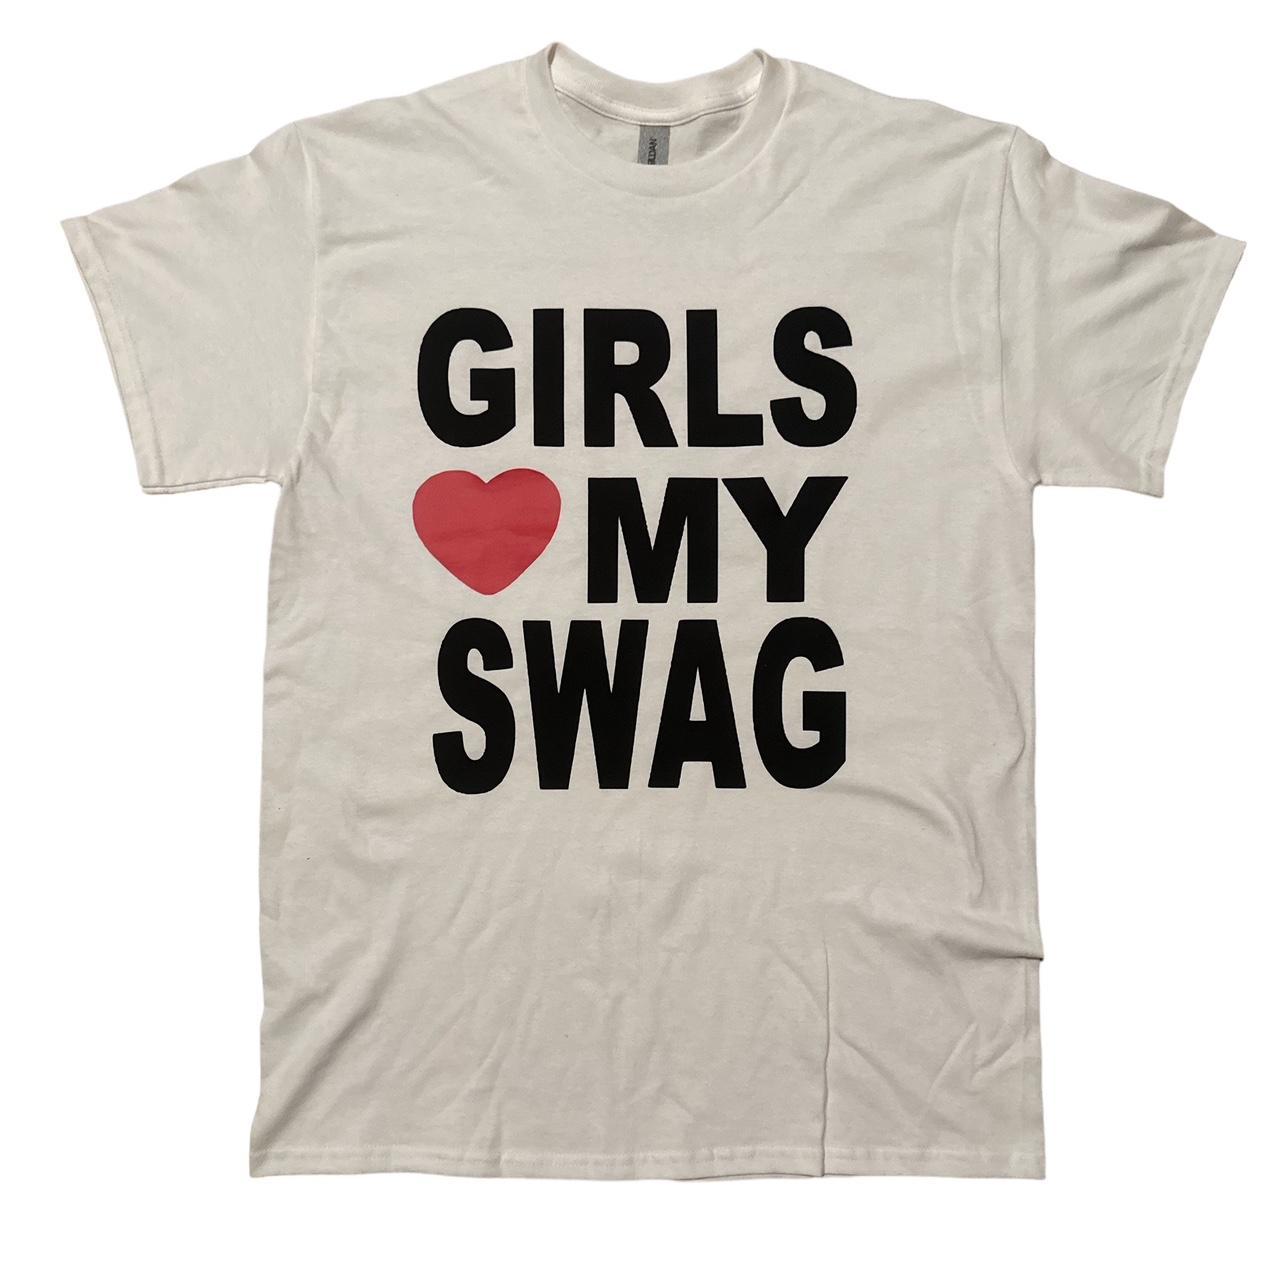 GIRLS <3 MY SWAG text tee *FREE SHIPPING ON - Depop